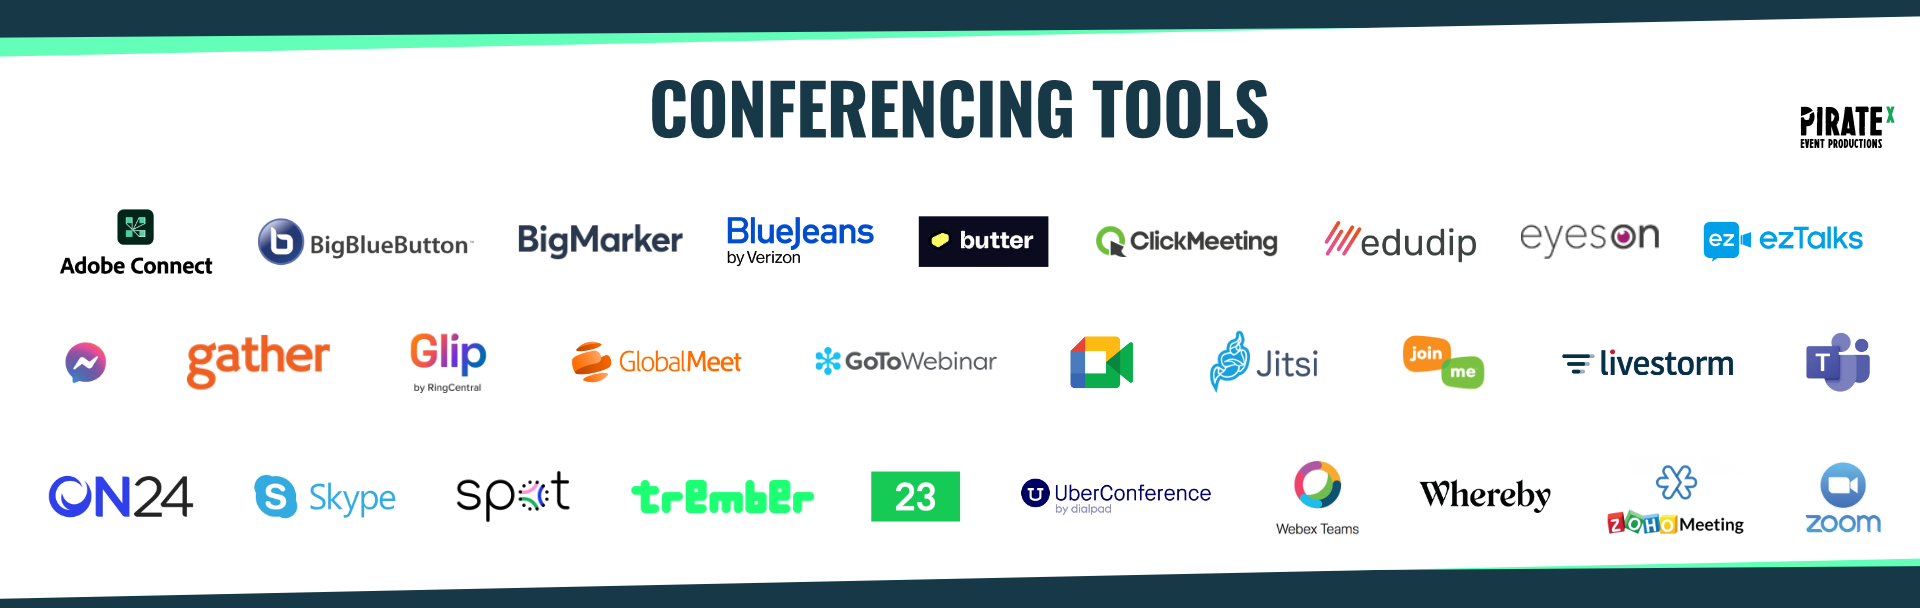 Overview of the Eventtech Landscape April 2021 Update conferencing tools category